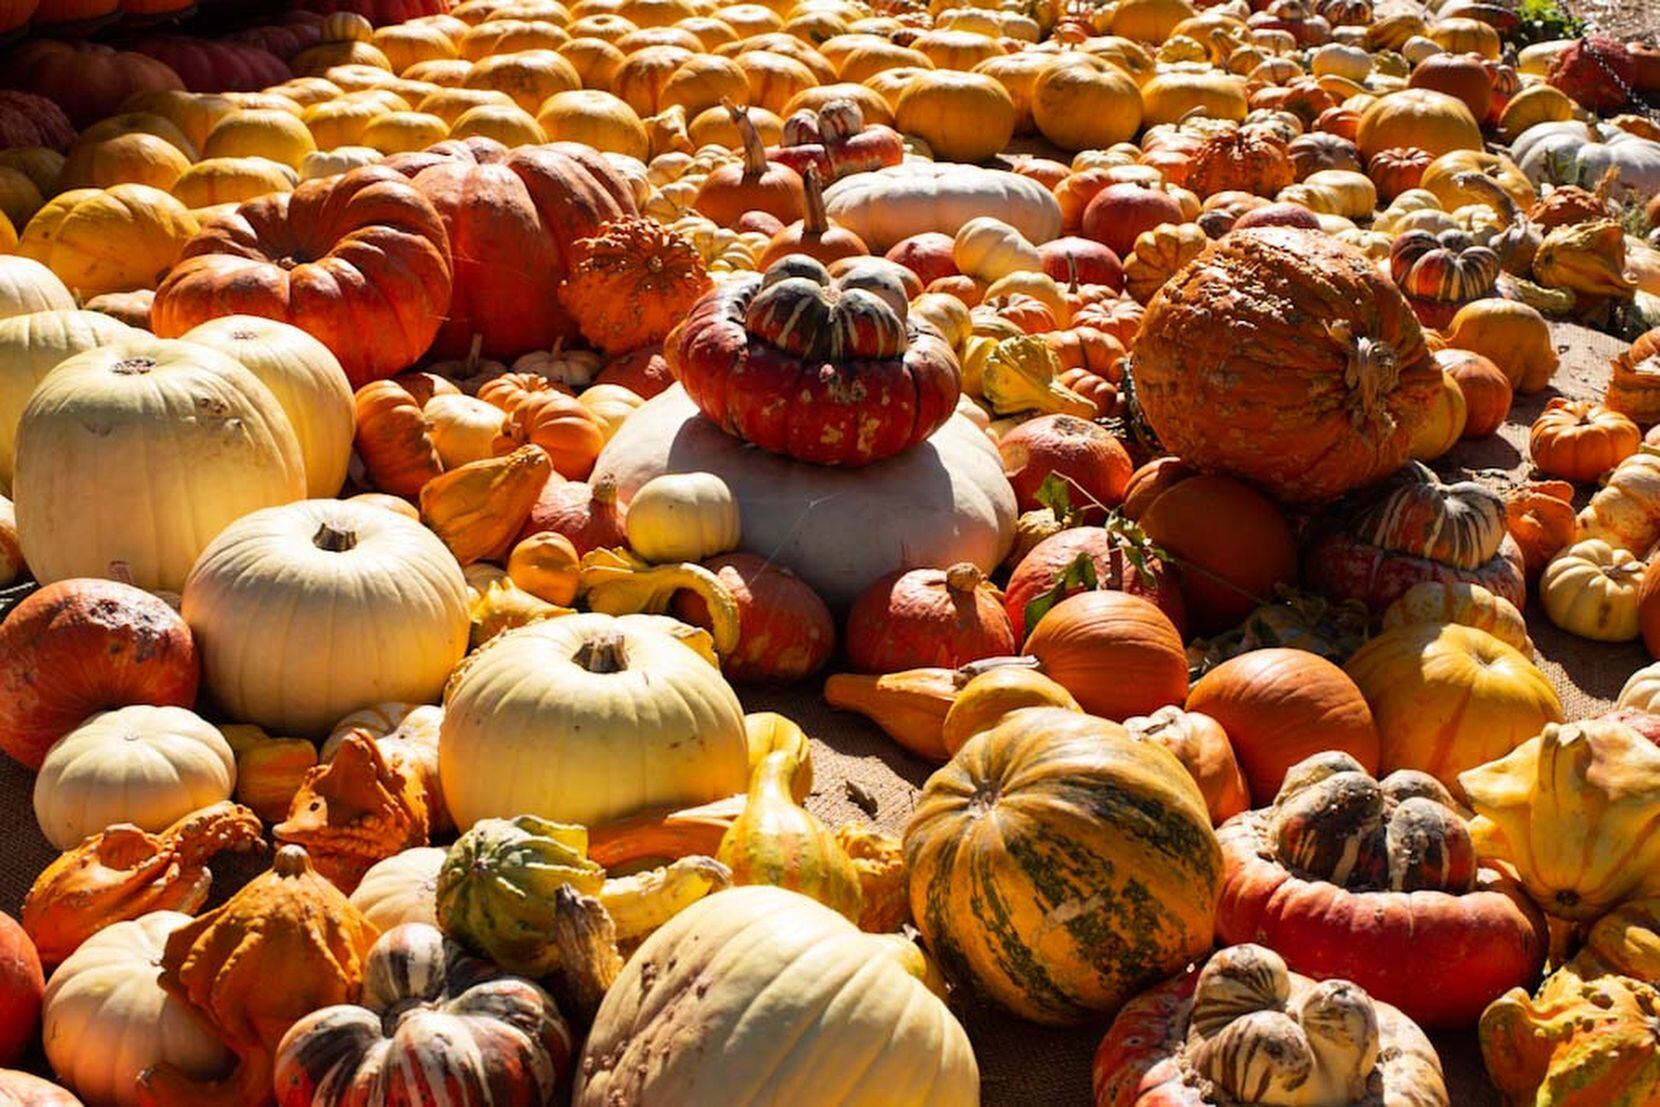 An assortment of pumpkins lie as a part of the setup during Halloween at the Dallas...